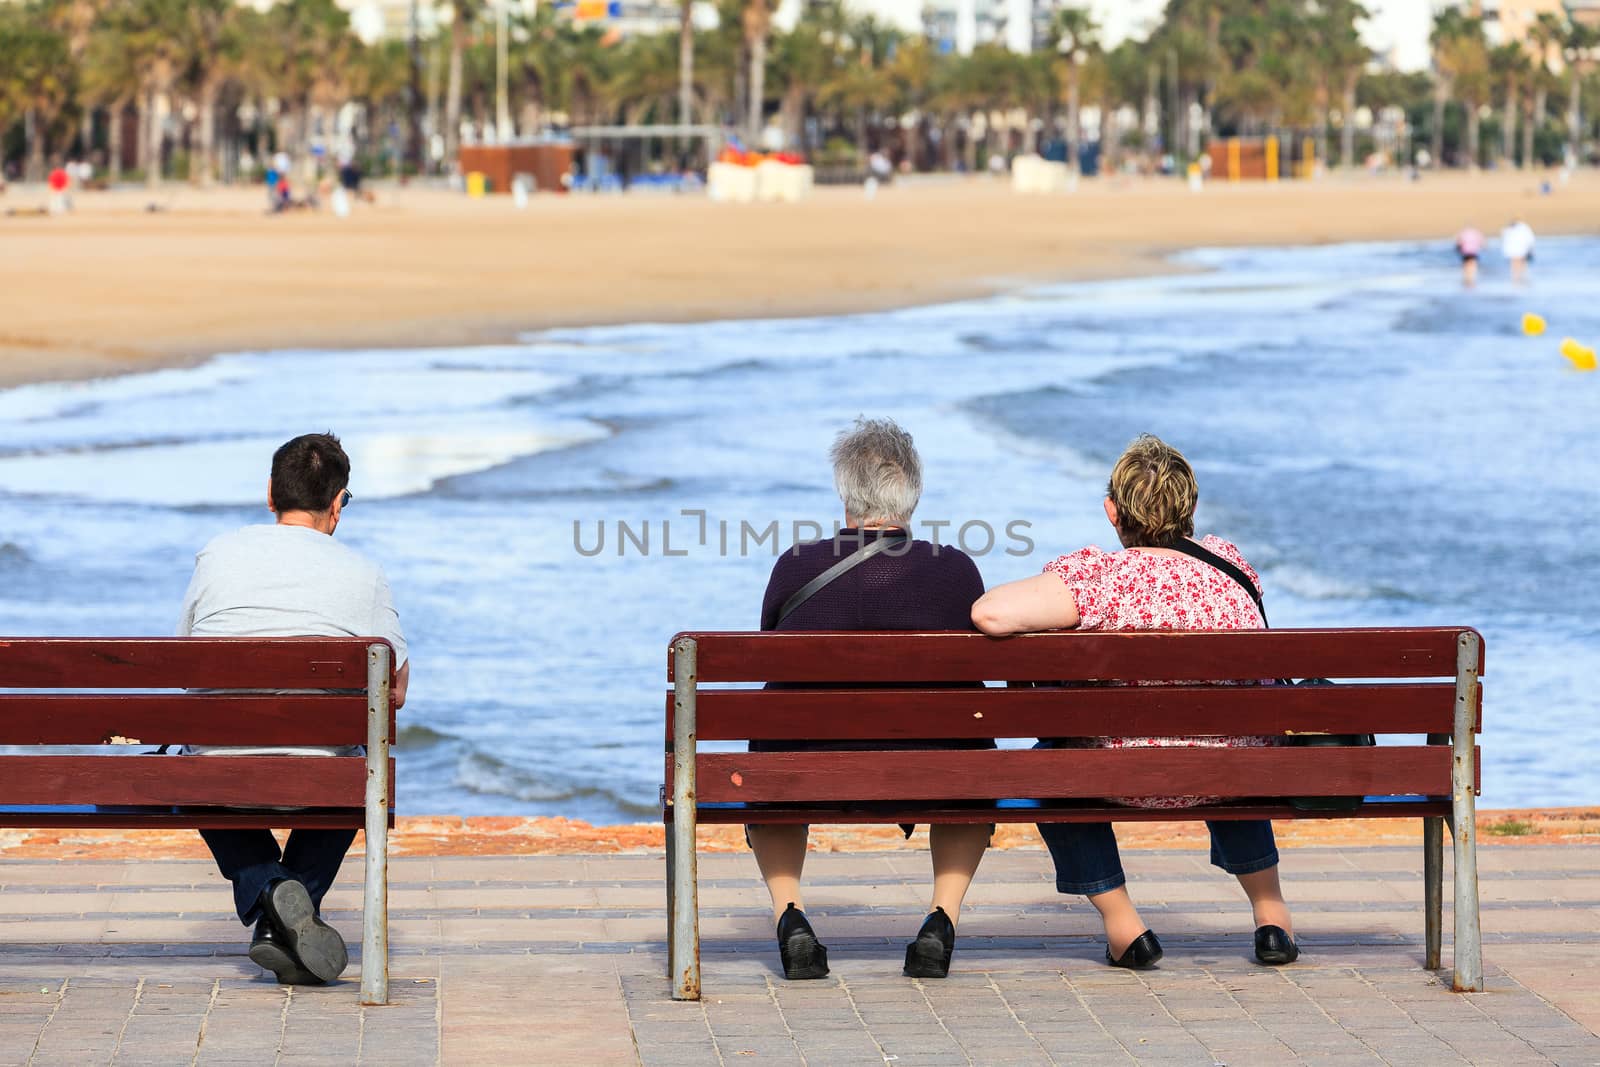 Seniors sitting and on the benches in front of the ocean or sea